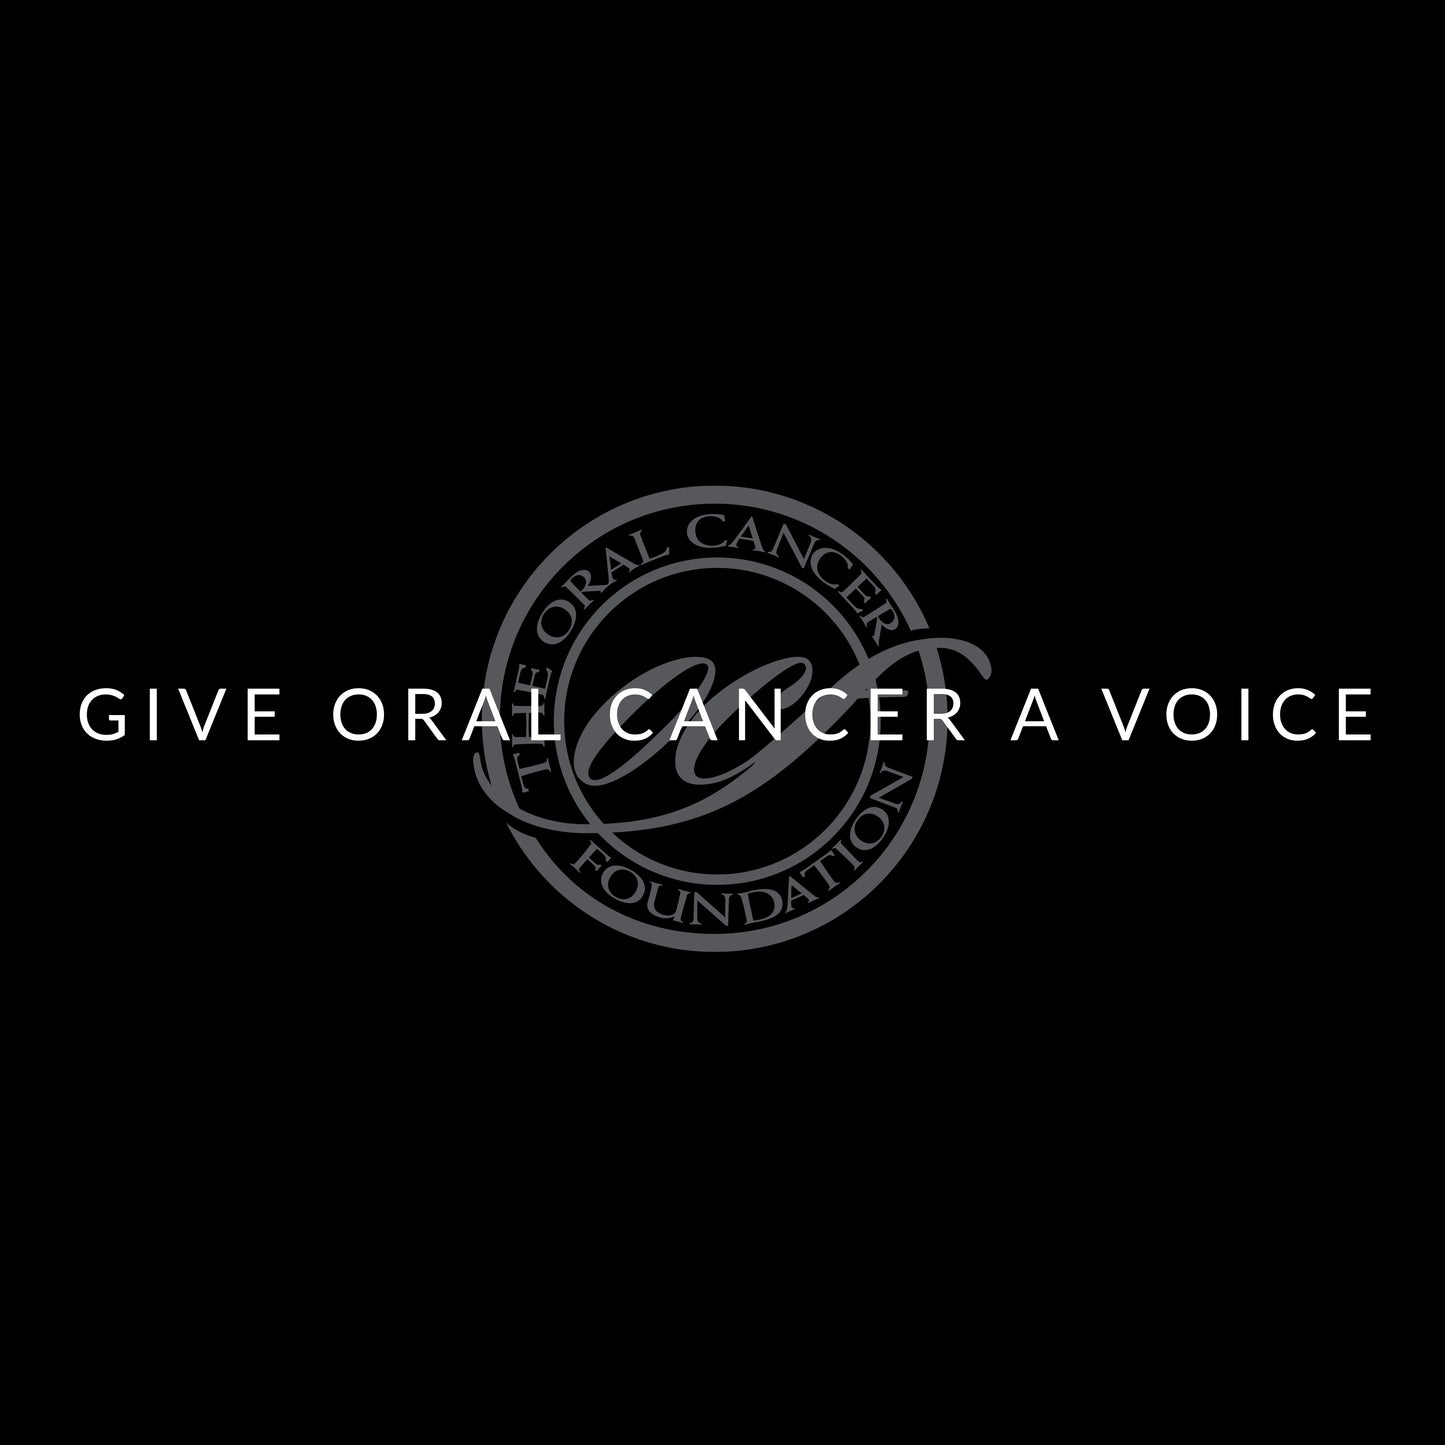 Give Oral Cancer a Voice Limited Edition Black T-Shirt